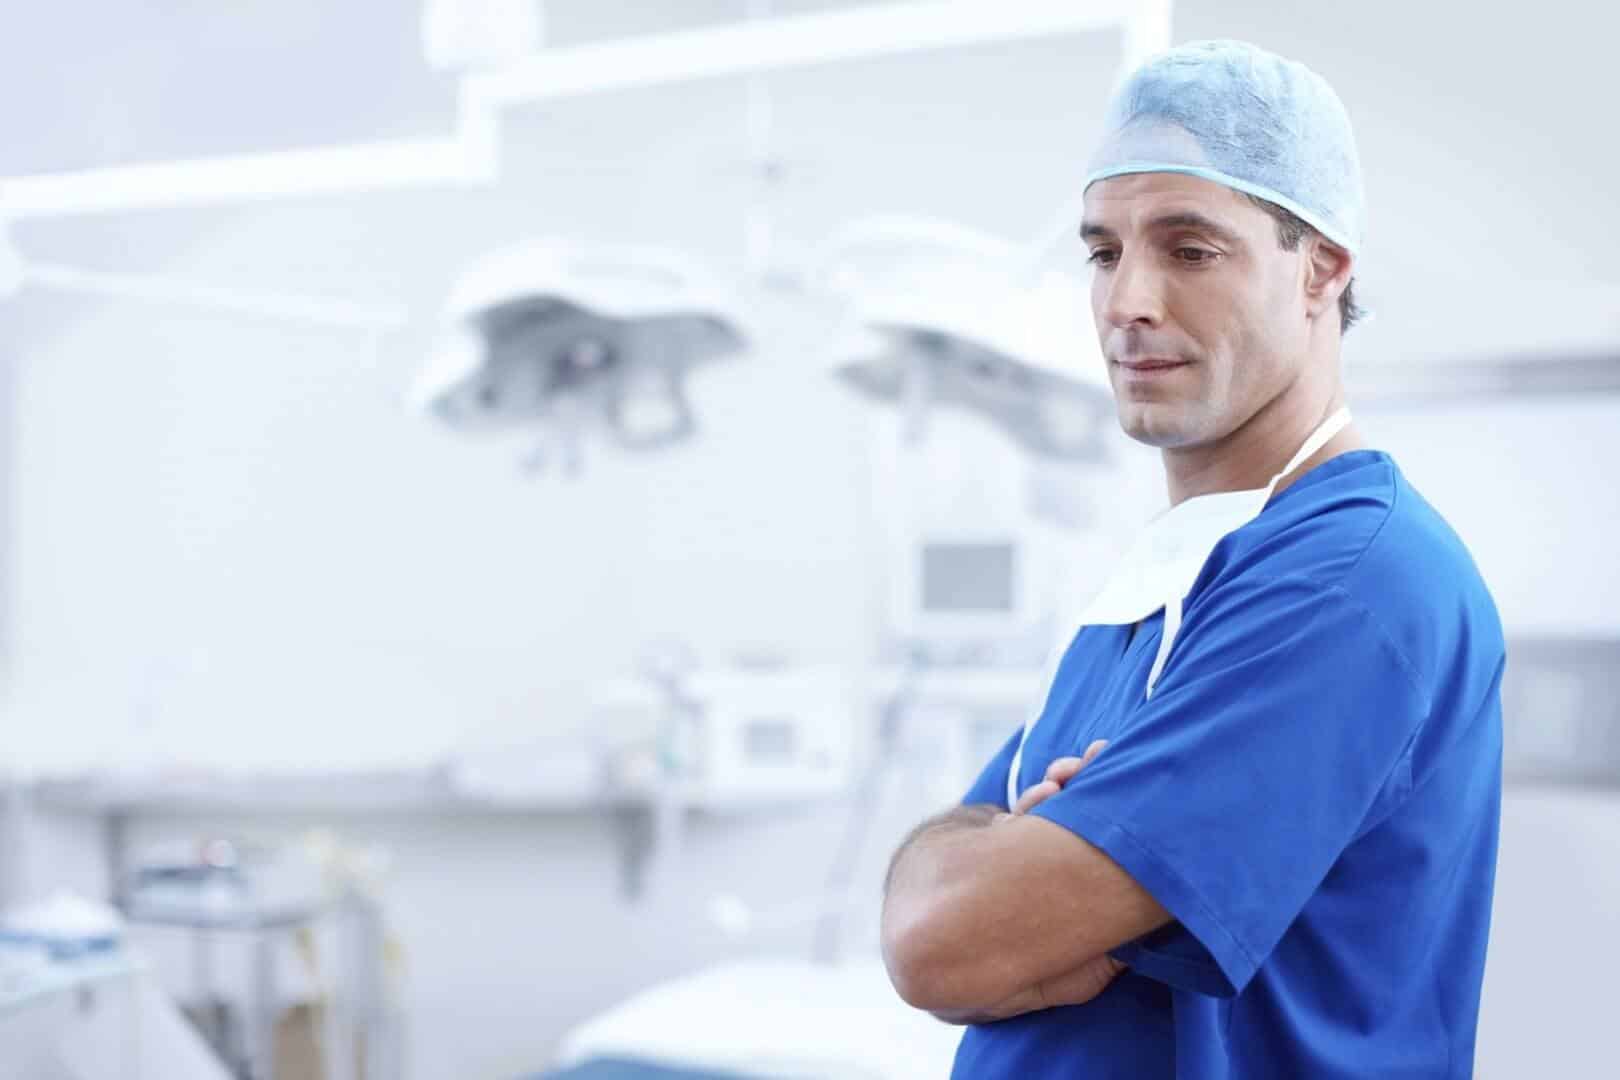 How Hospital Workers’ Get Hurt